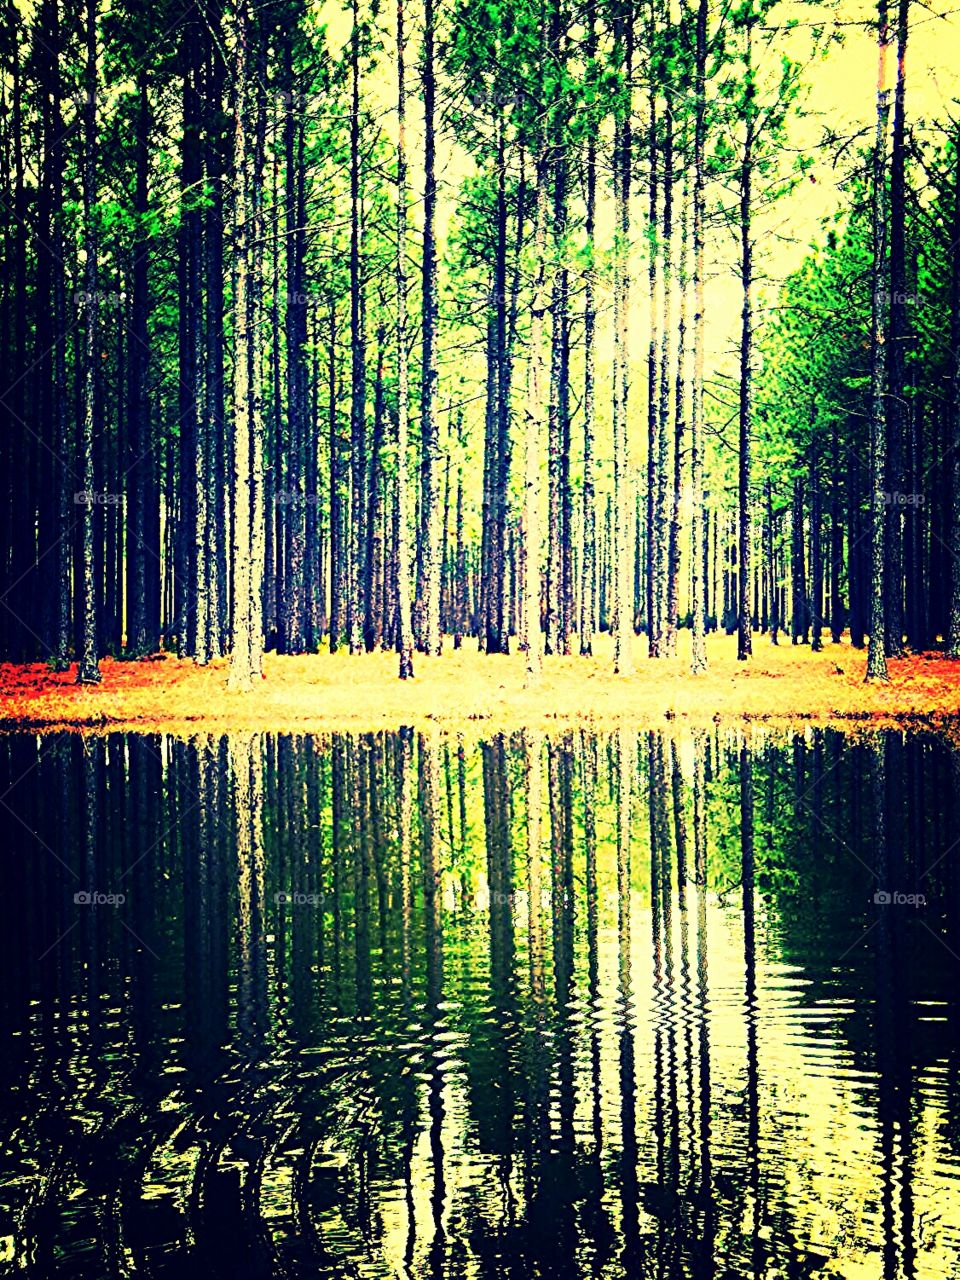 Pond Paradise. reflection of trees in a pond